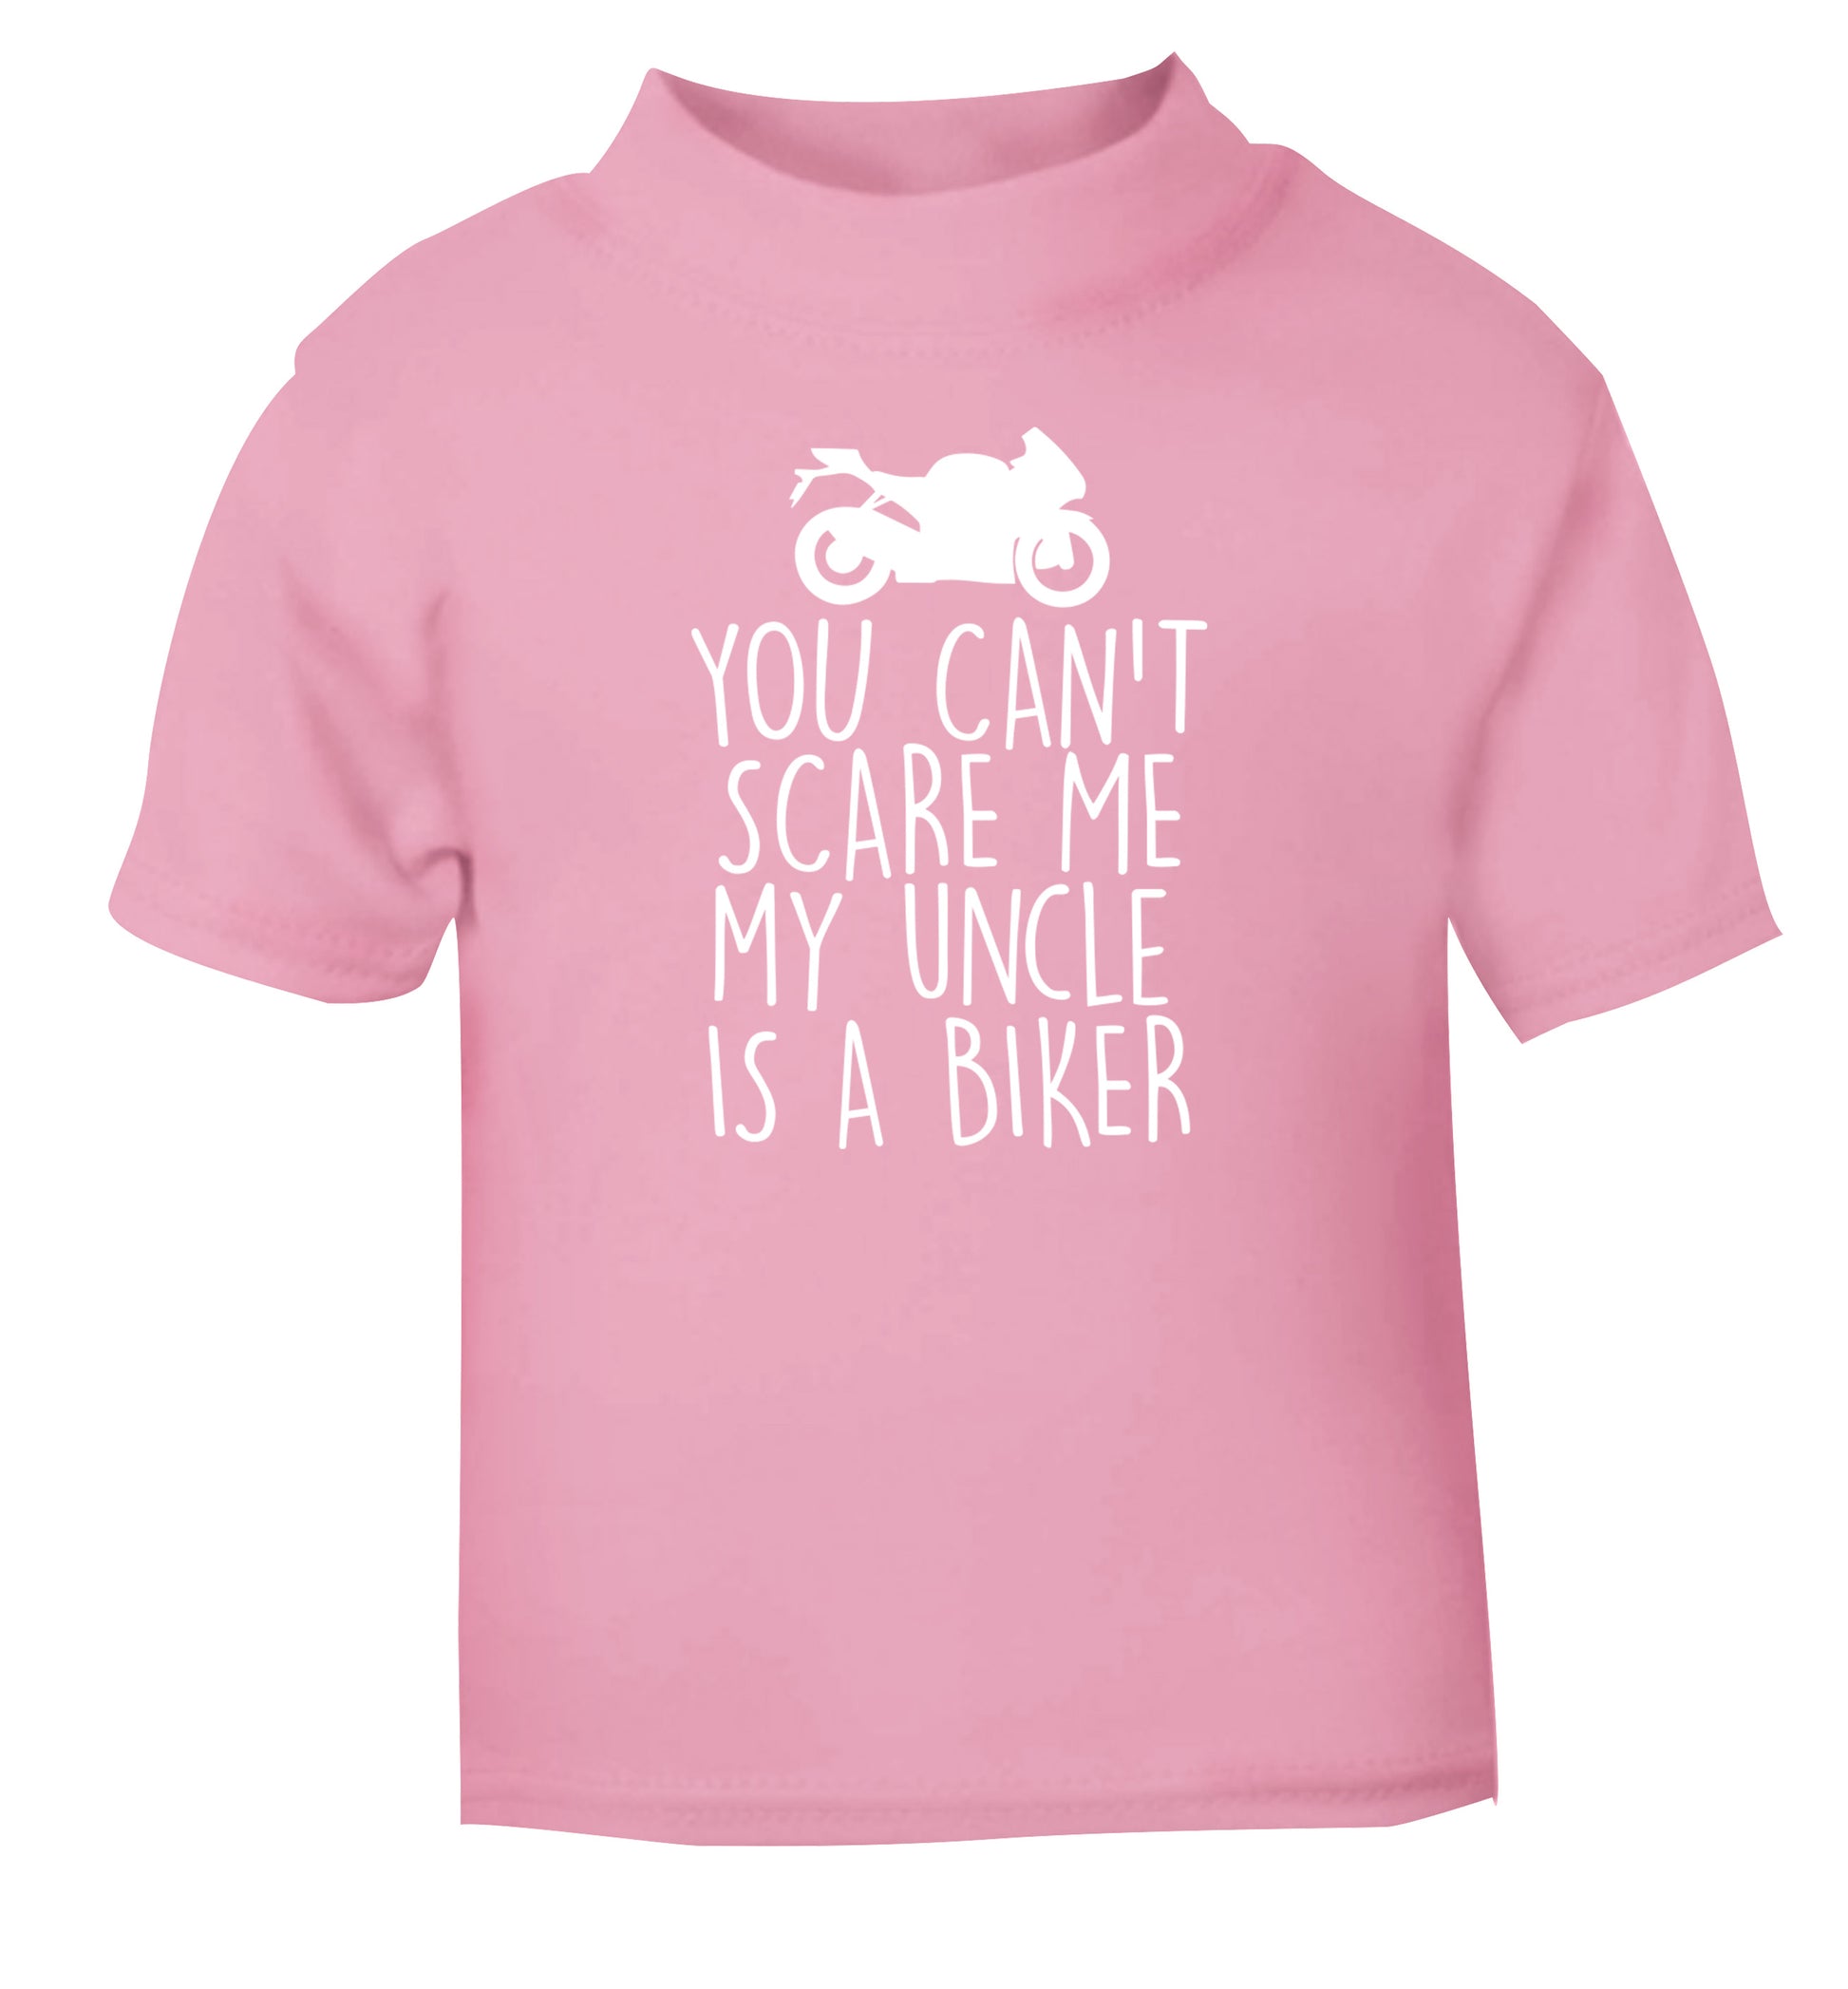 You can't scare me my uncle is a biker light pink Baby Toddler Tshirt 2 Years